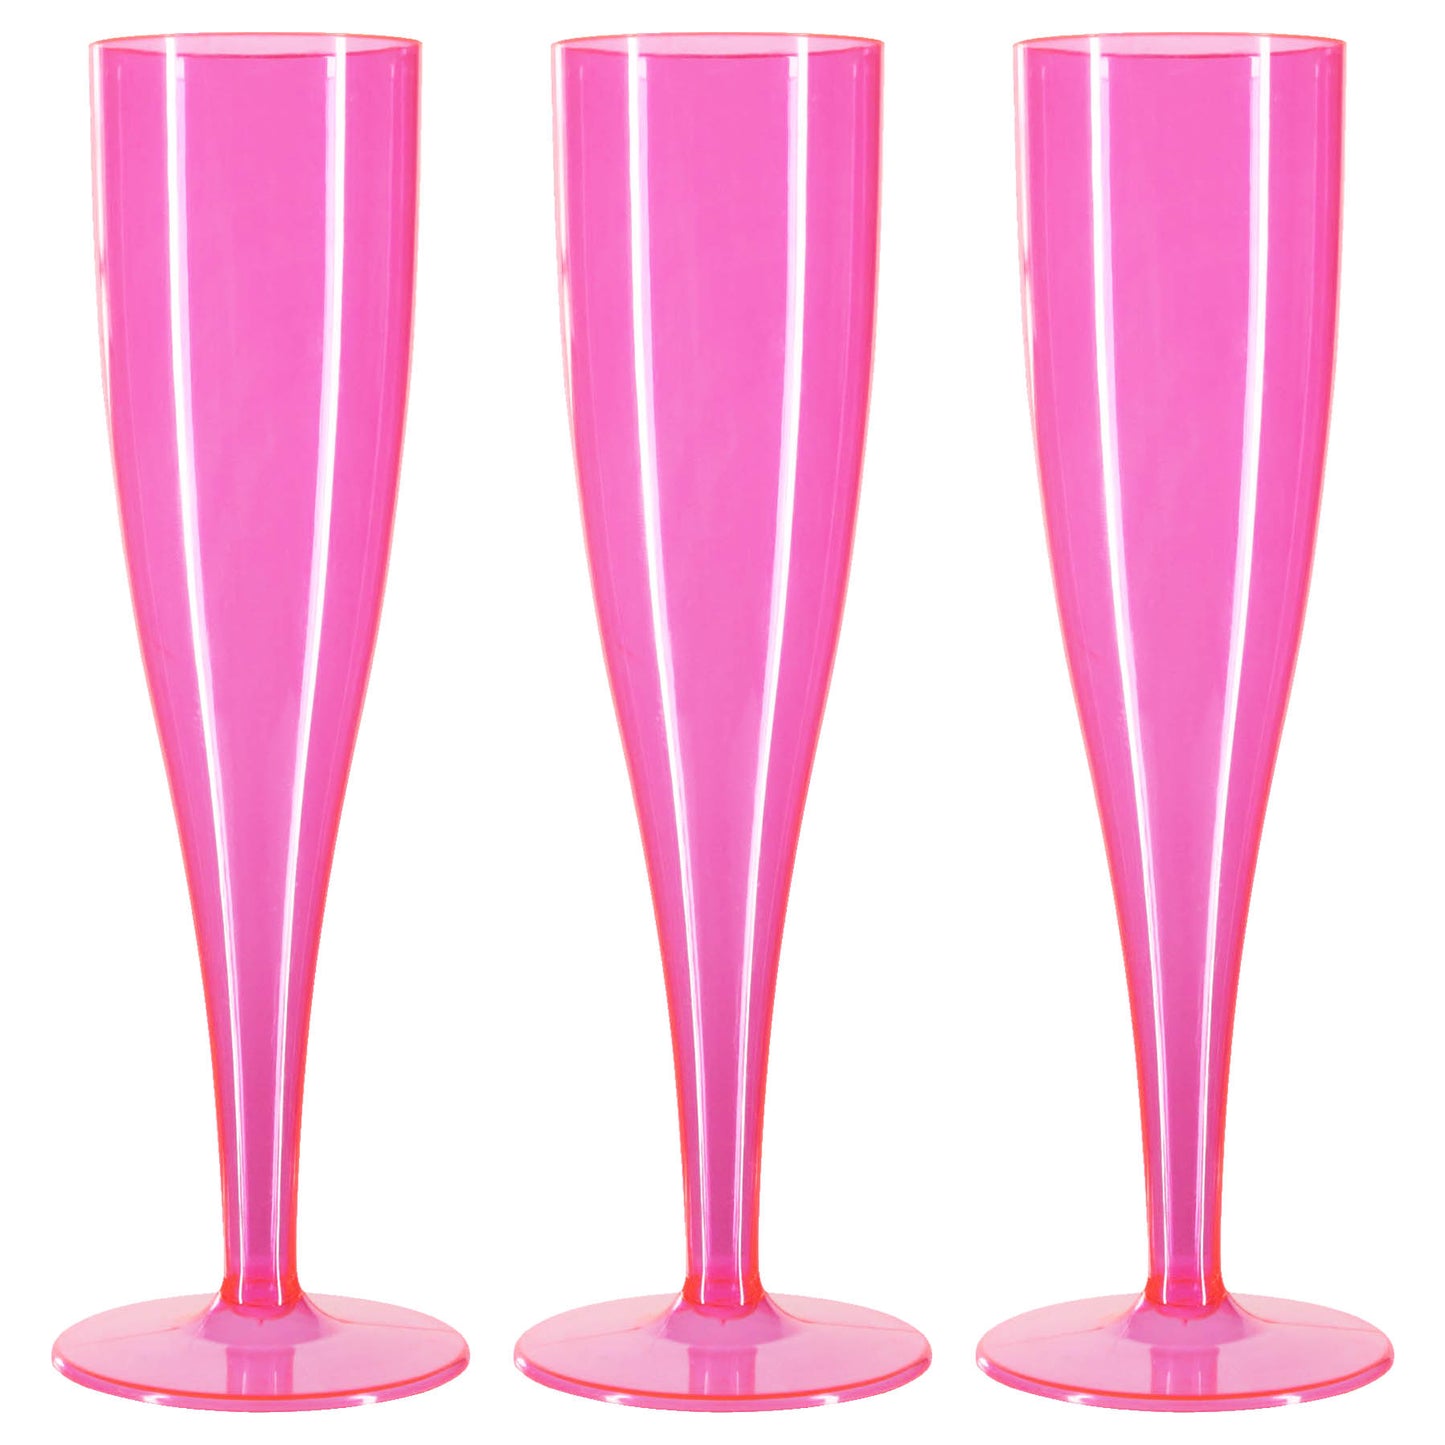 100 x Pink Prosecco Flutes 175ml 6oz Capacity Recyclable Polystyrene Material Transparent 1-Piece Sturdy Champagne Glasses BBQs Picnics-5056020107163-PCUP-CHAMPPINKx10-Product Pro-Champagne Glasses, Clear Champagne Glasses, Pink, Plastic Flutes, Prosecco Flutes